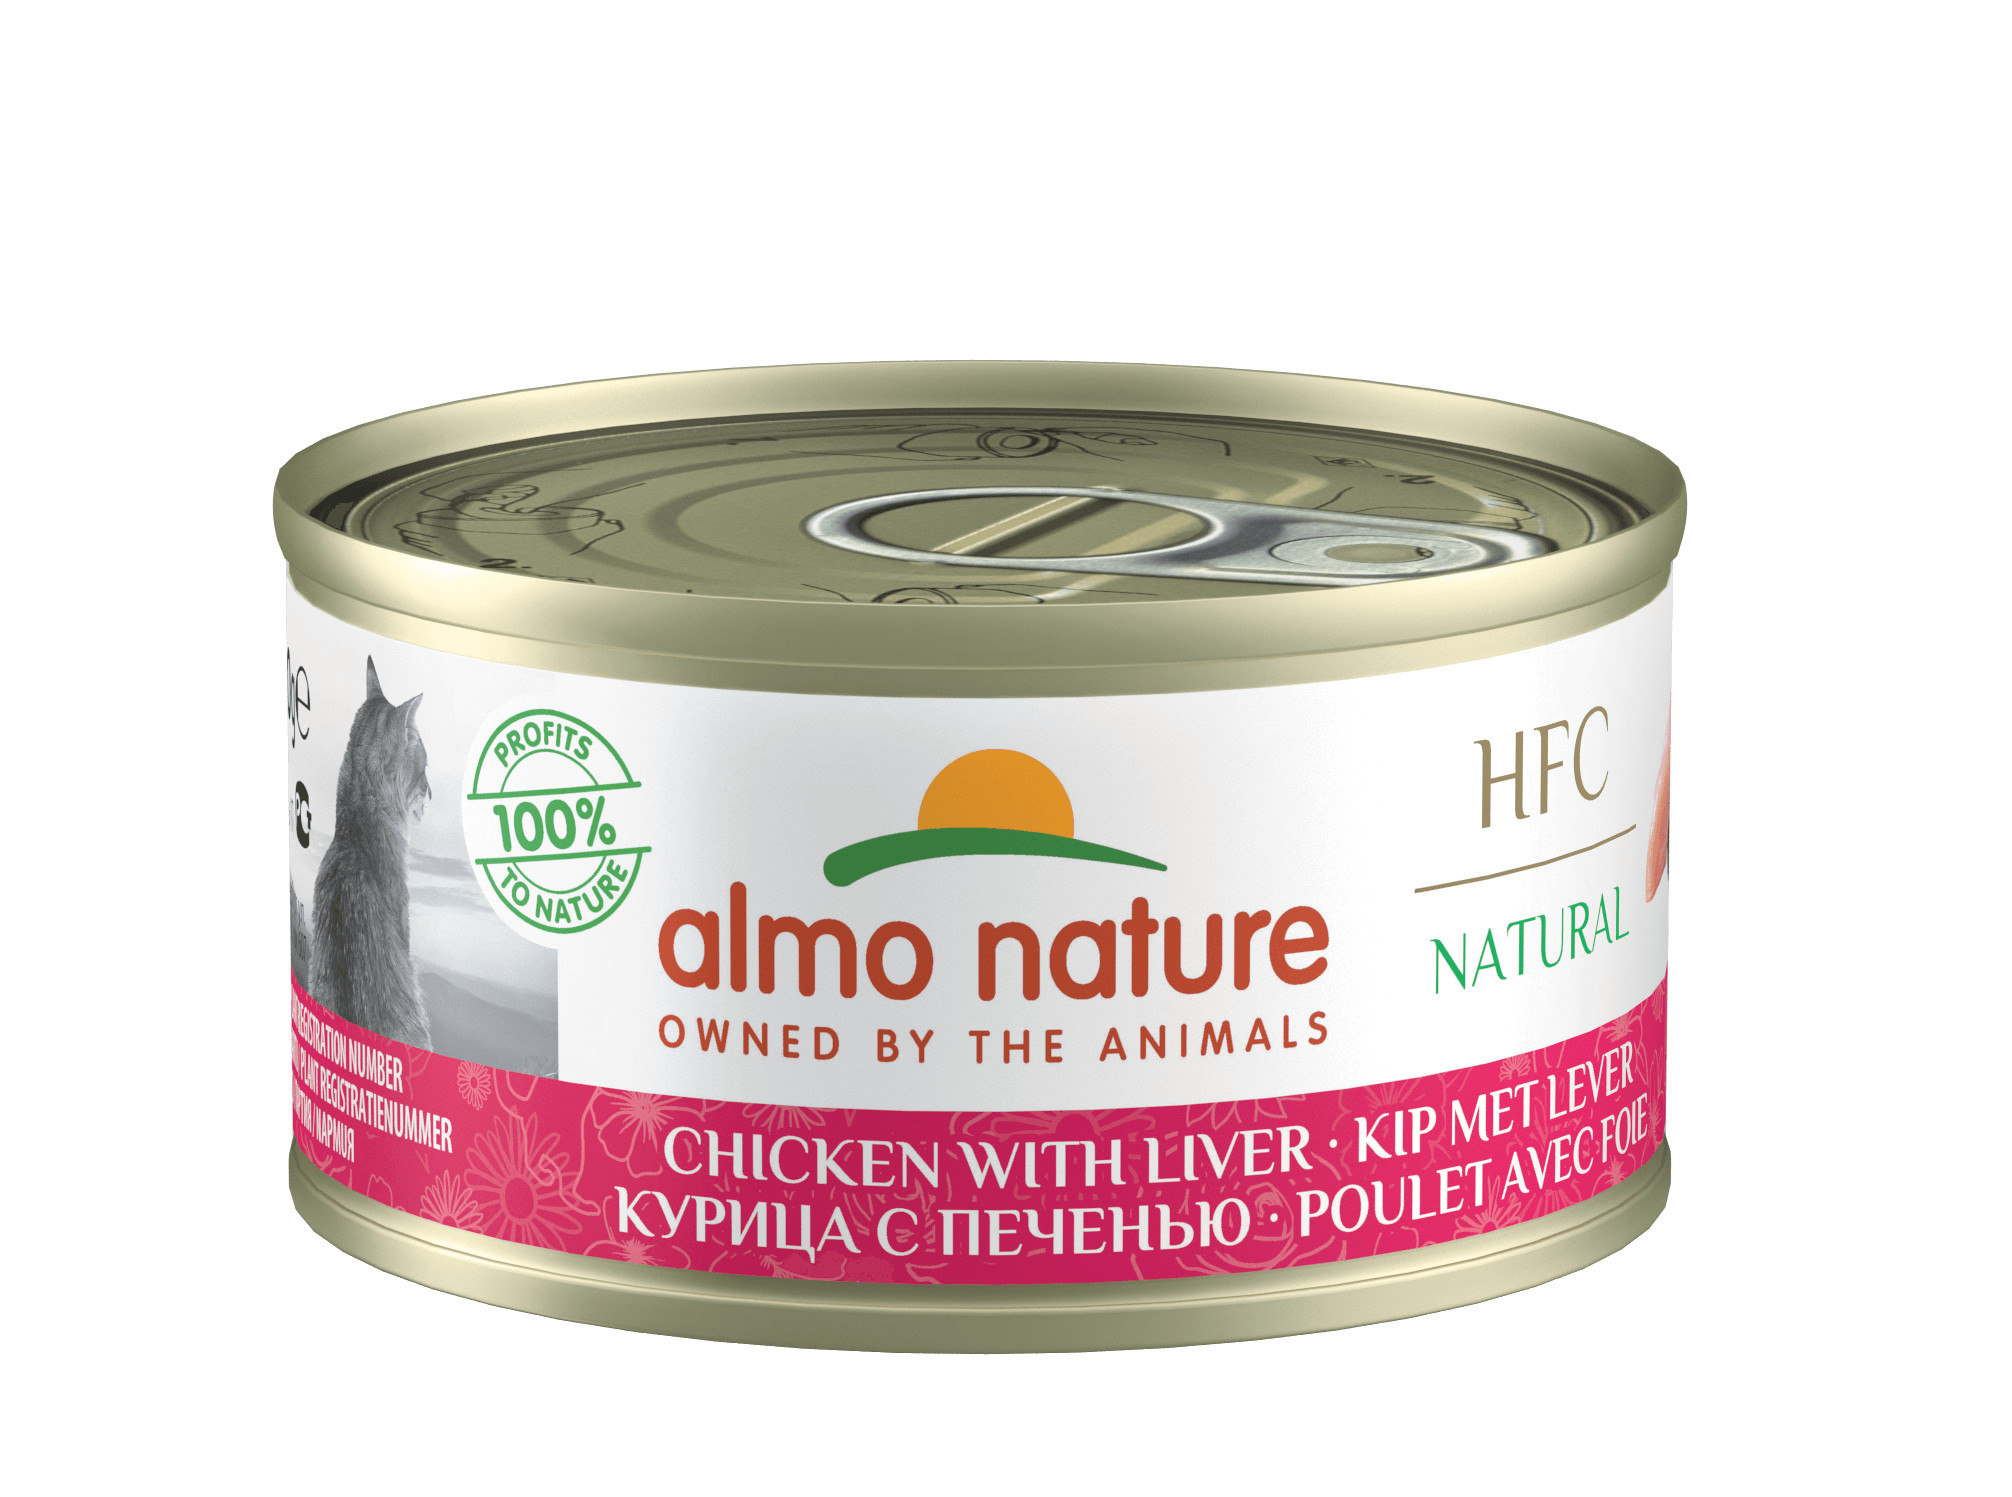 Almo Nature HFC Natural kylling & lever (70 g)